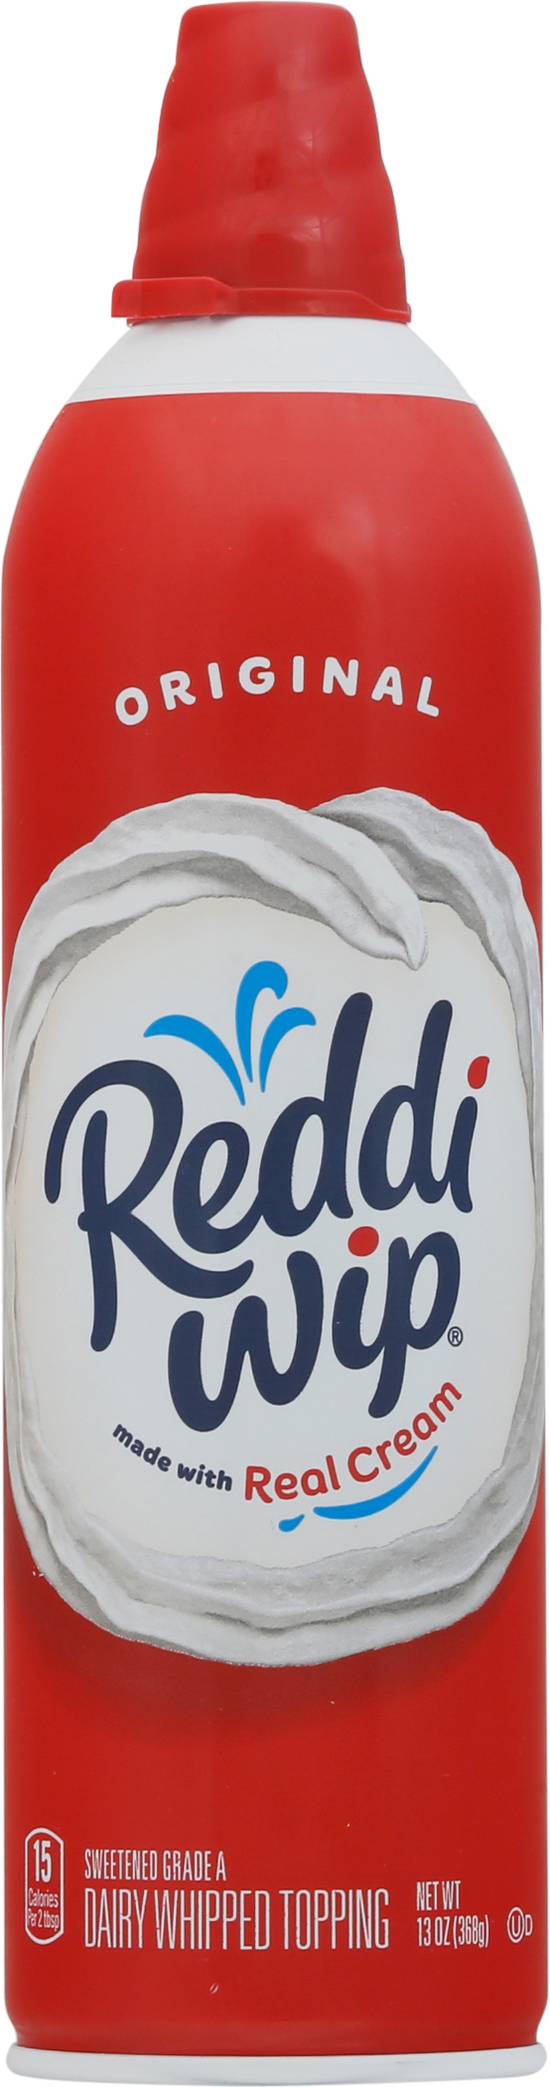 Get Reddi Food and Poly Bag 10 inches x 8 inches x 24 inches 22